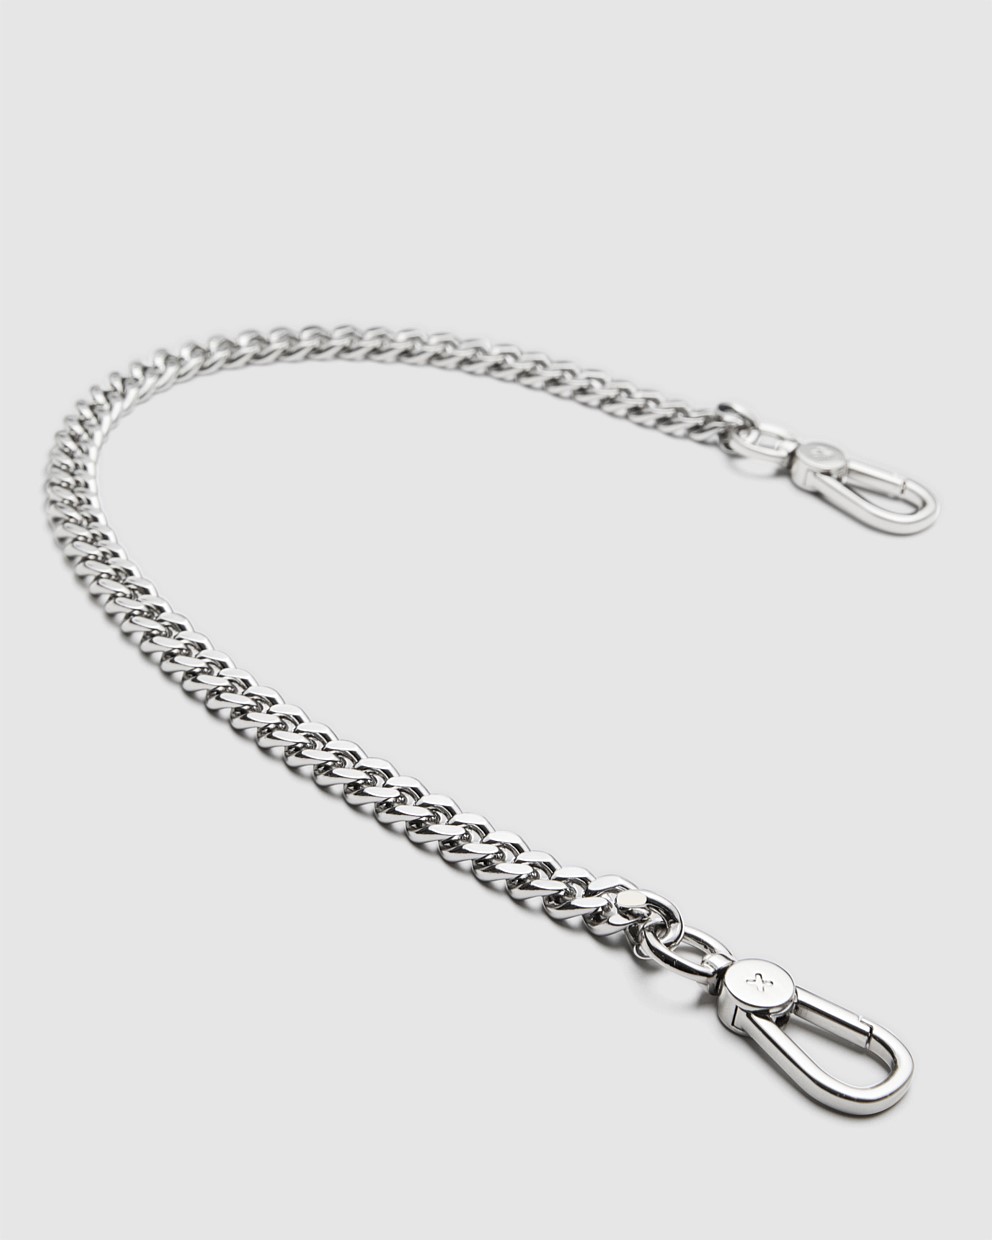 Chain shoulder strap silver, Make your own item